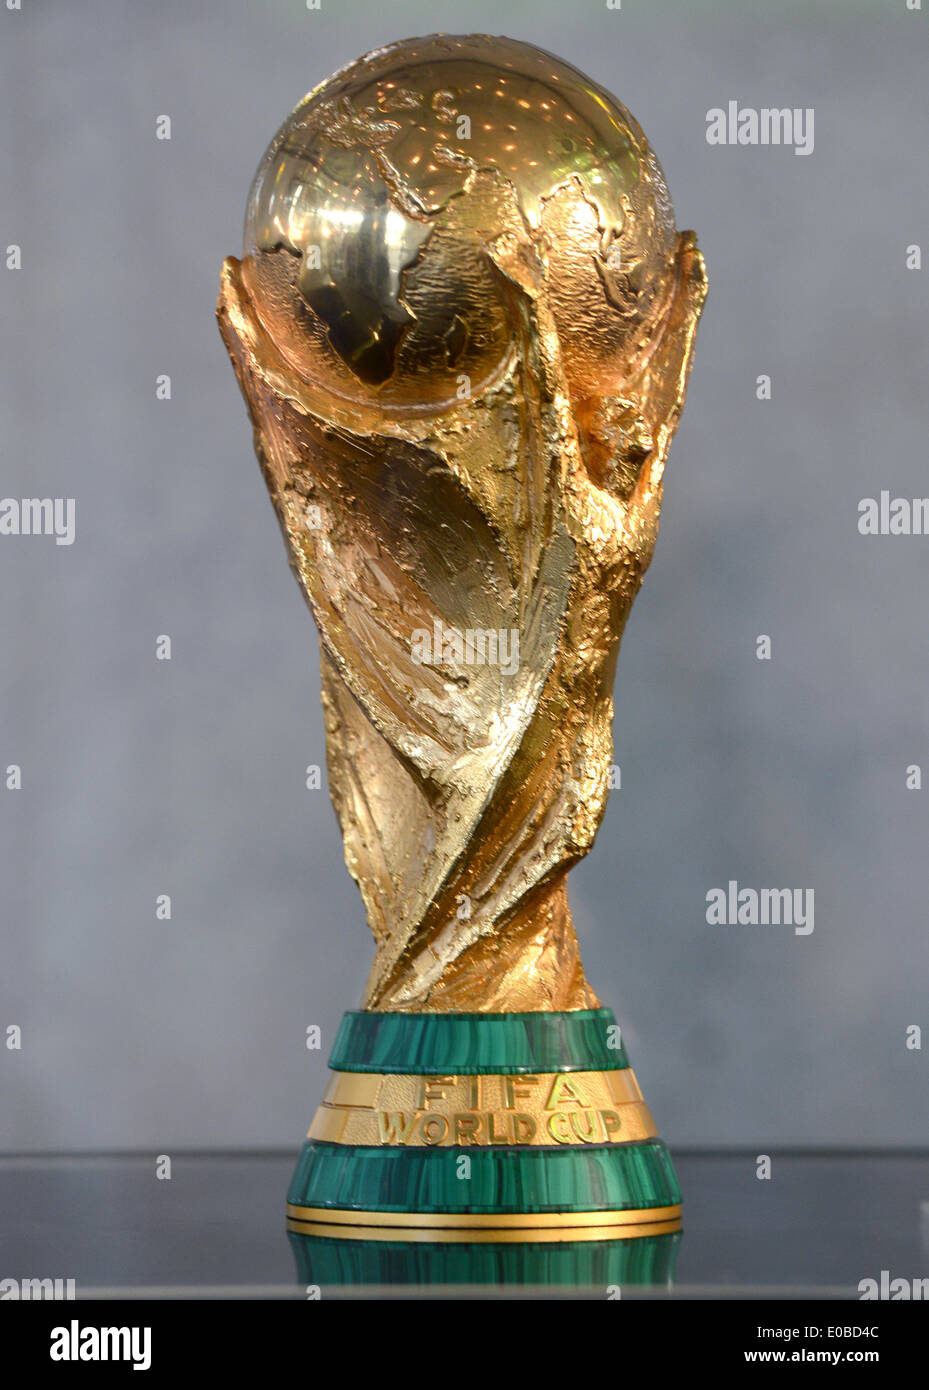 Frankfurt Main, Germany. 08th May, 2014. A remake of the FIFA world cup  trophy is on display during a press conference at the headquarters of the  German Football Association (DFB) in Frankfurt